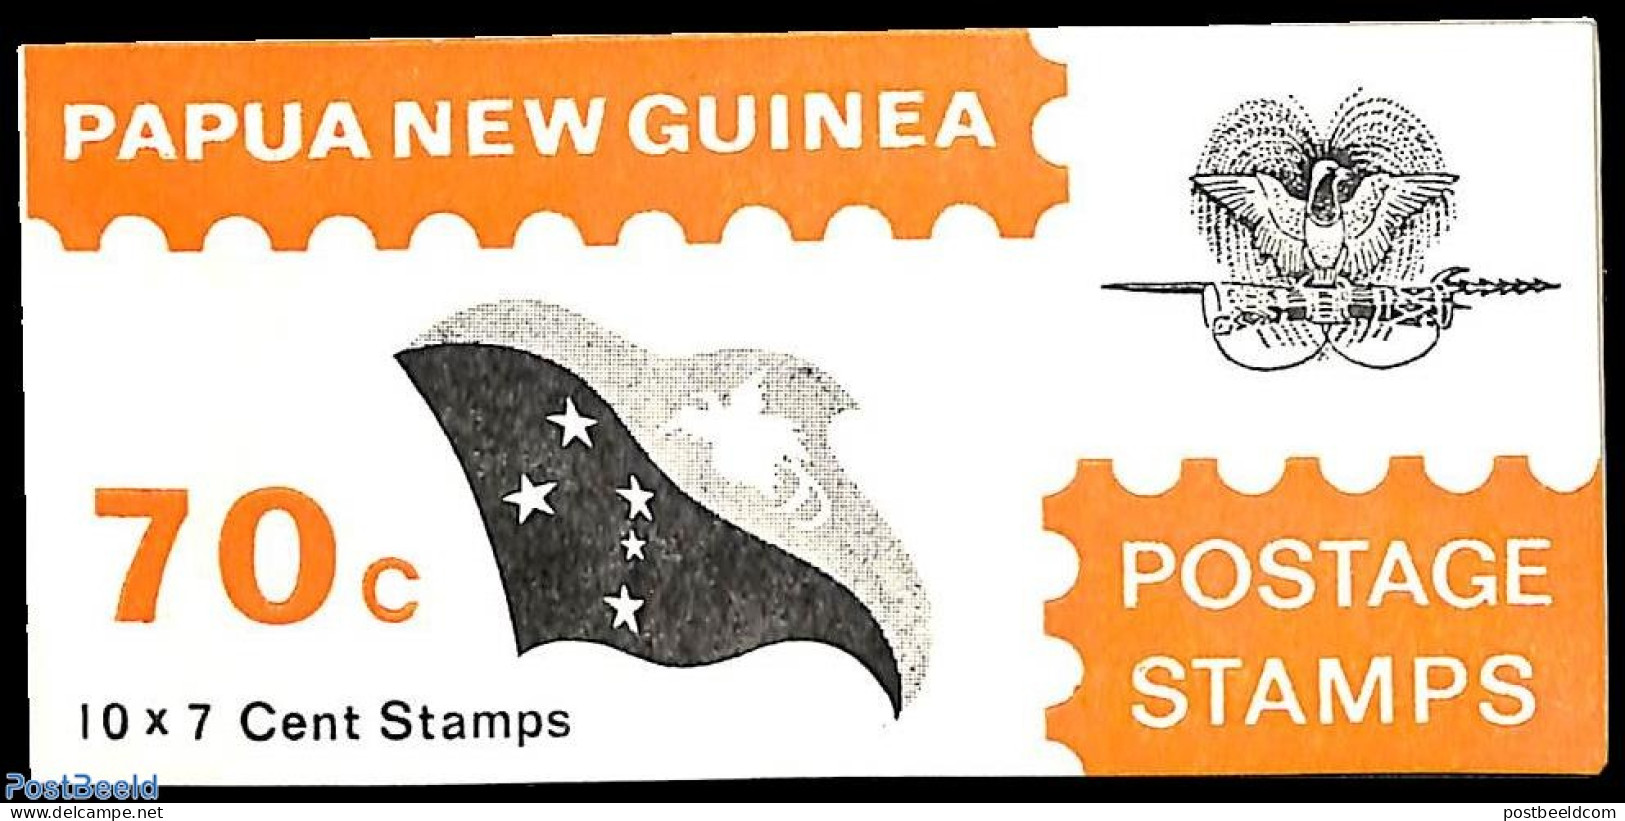 Papua New Guinea 1973 Telecomm. Booklet Adv: Olivetti/Book Depot, Mint NH, Science - Telecommunication - Stamp Booklets - Telecom